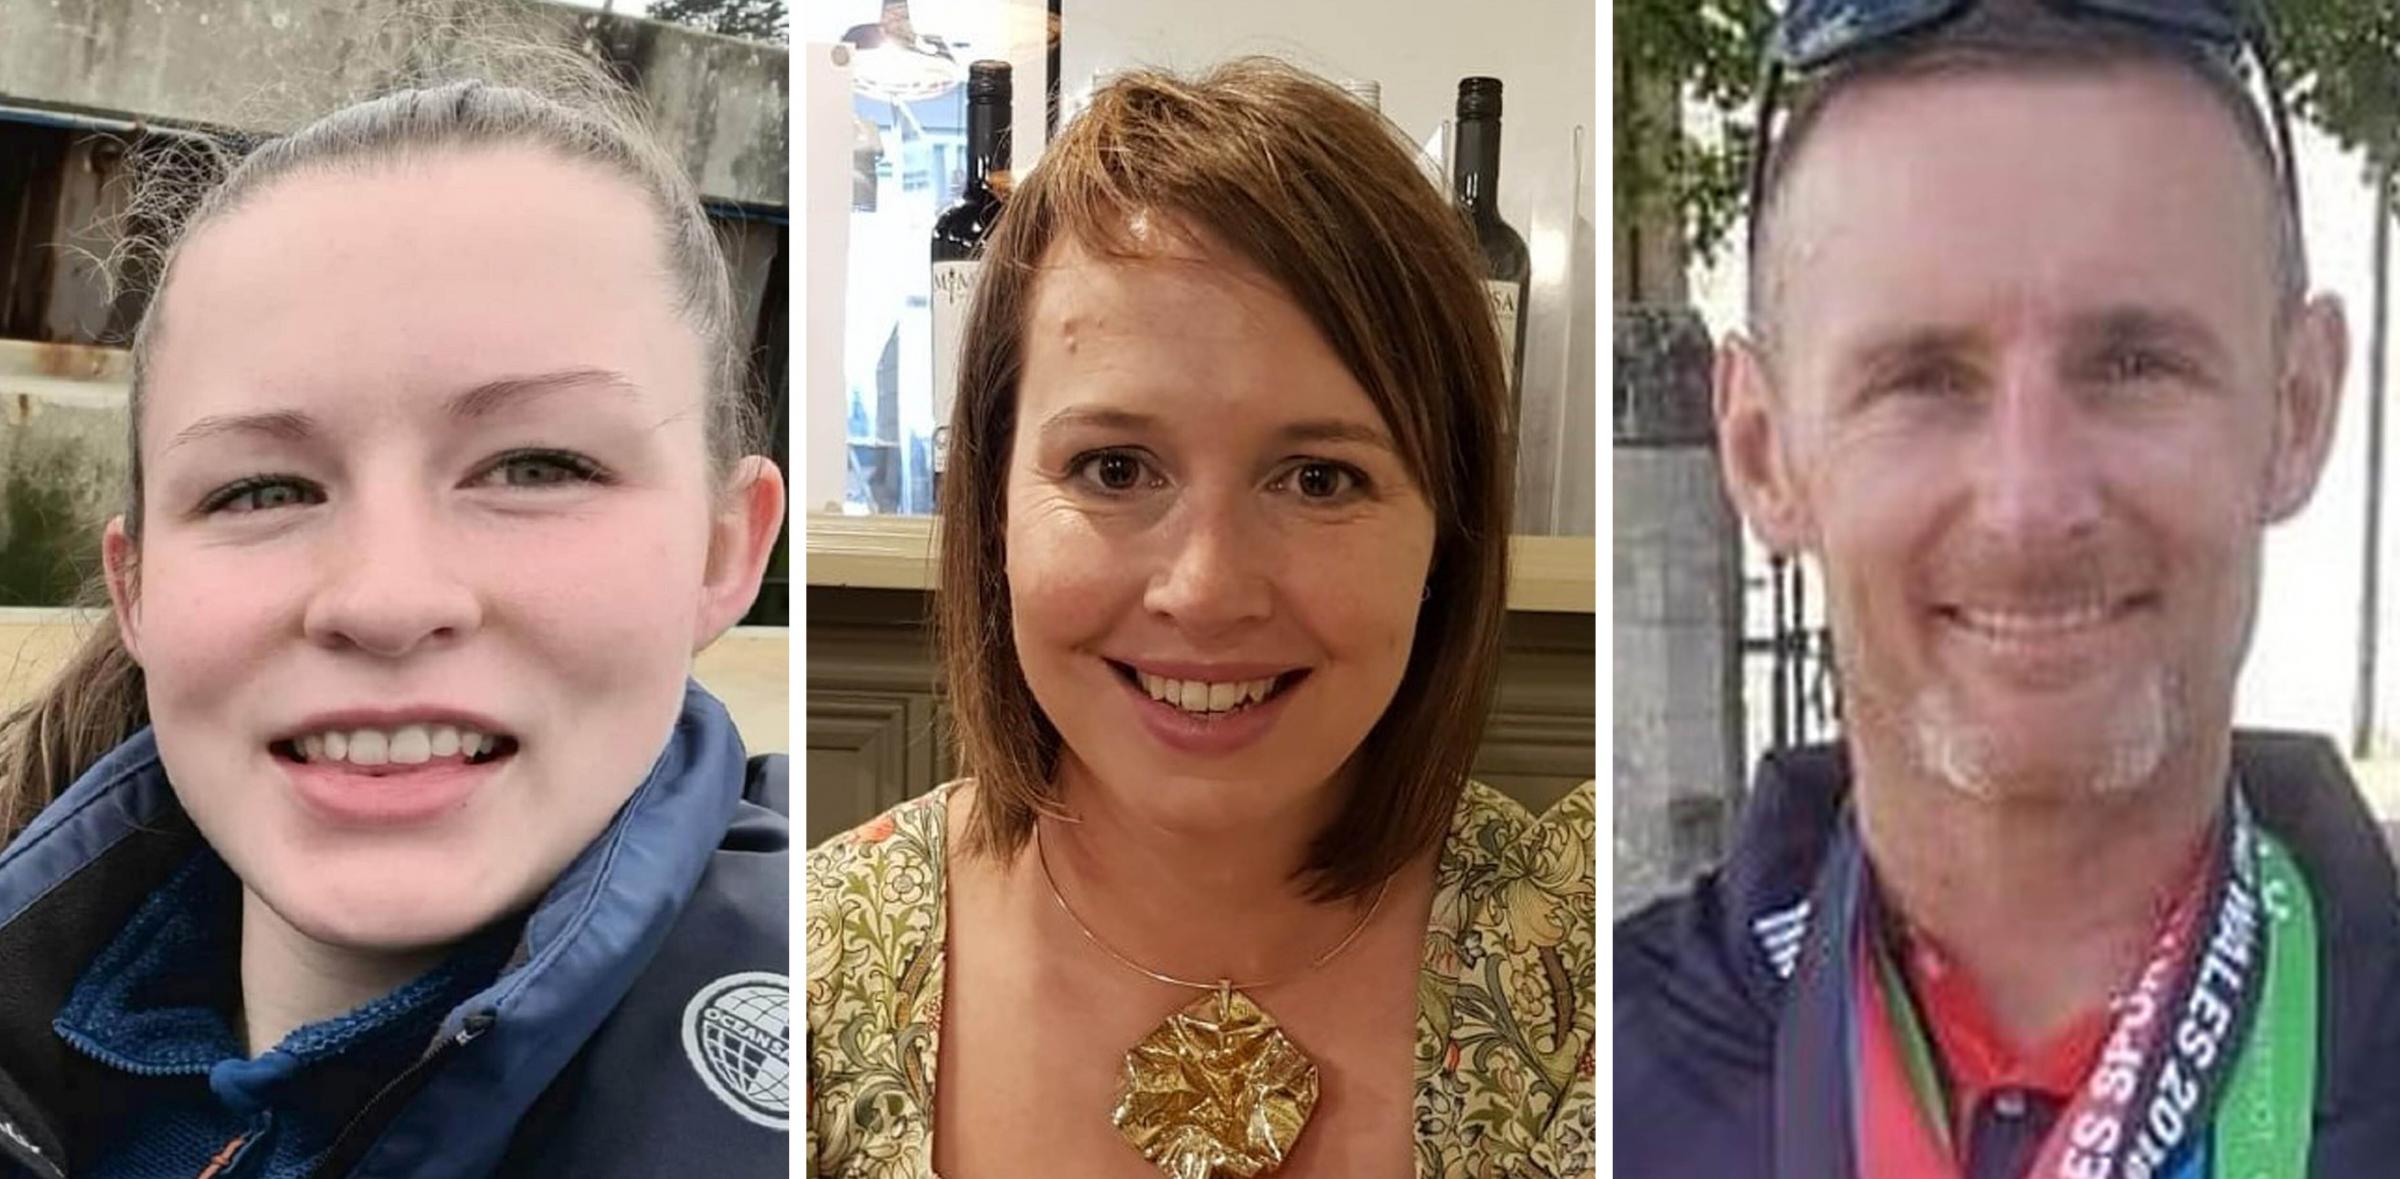 Undated family handout file photos of (left to right) Morgan Rogers, 24, from Cefin Coed, Merthyr Tydfil, Nicola Wheatley, 40, from Pontardulais, Swansea, and Paul ODwyer, 42, from Sandfields, Port Talbot, who died after a paddleboarding accident in